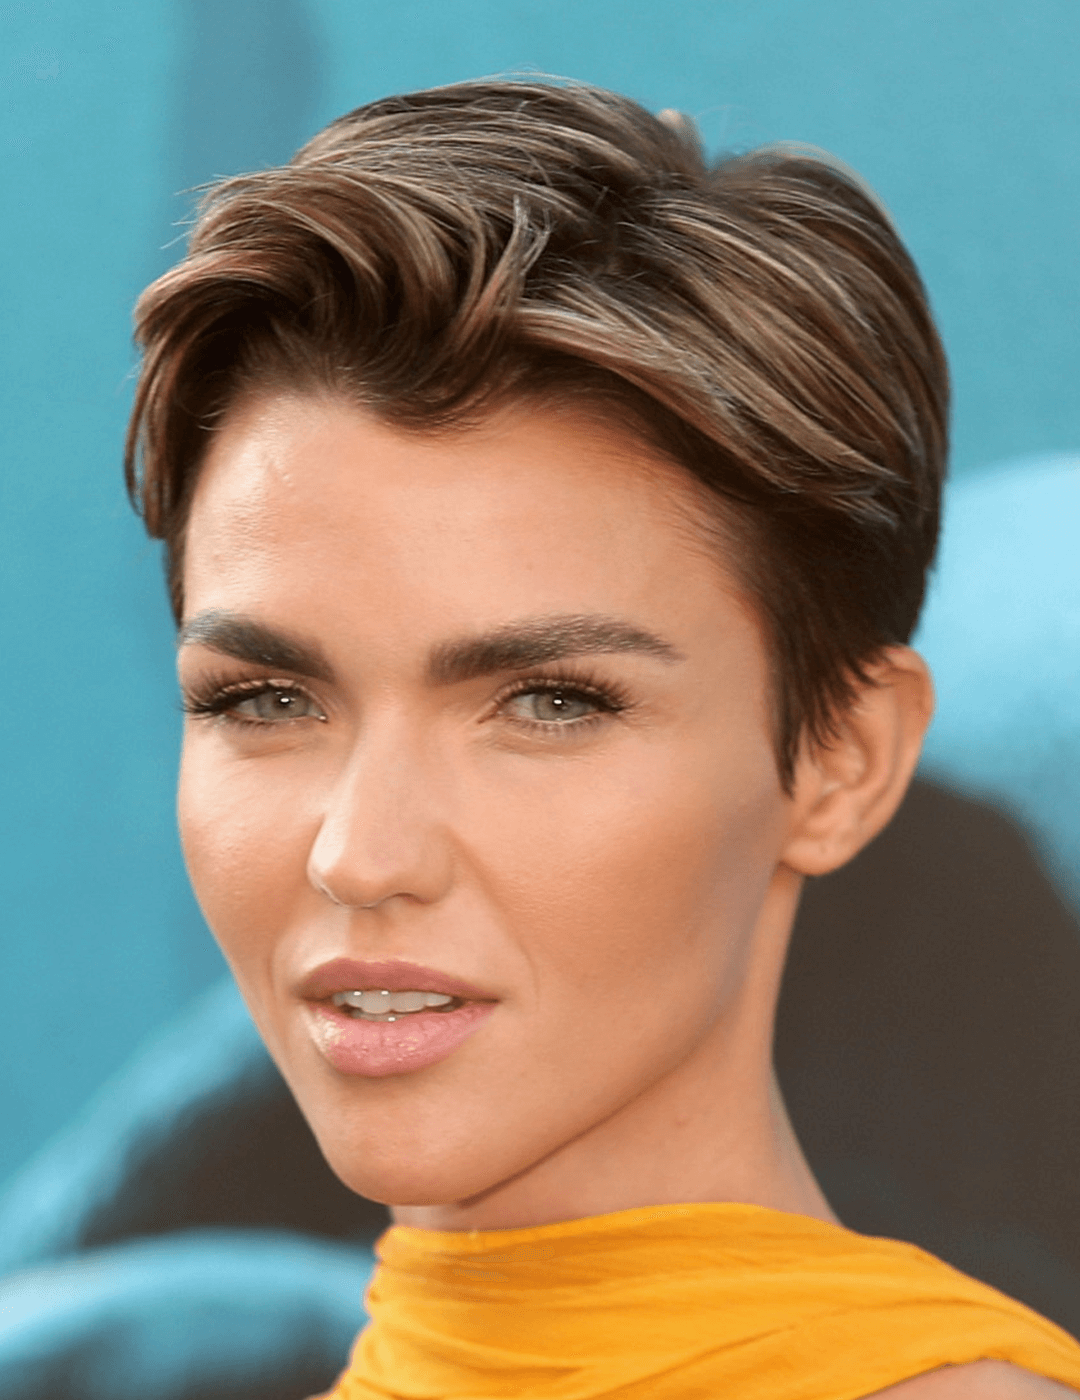 Ruby Rose in a yellow dress rocking a boy band cut hairstyle